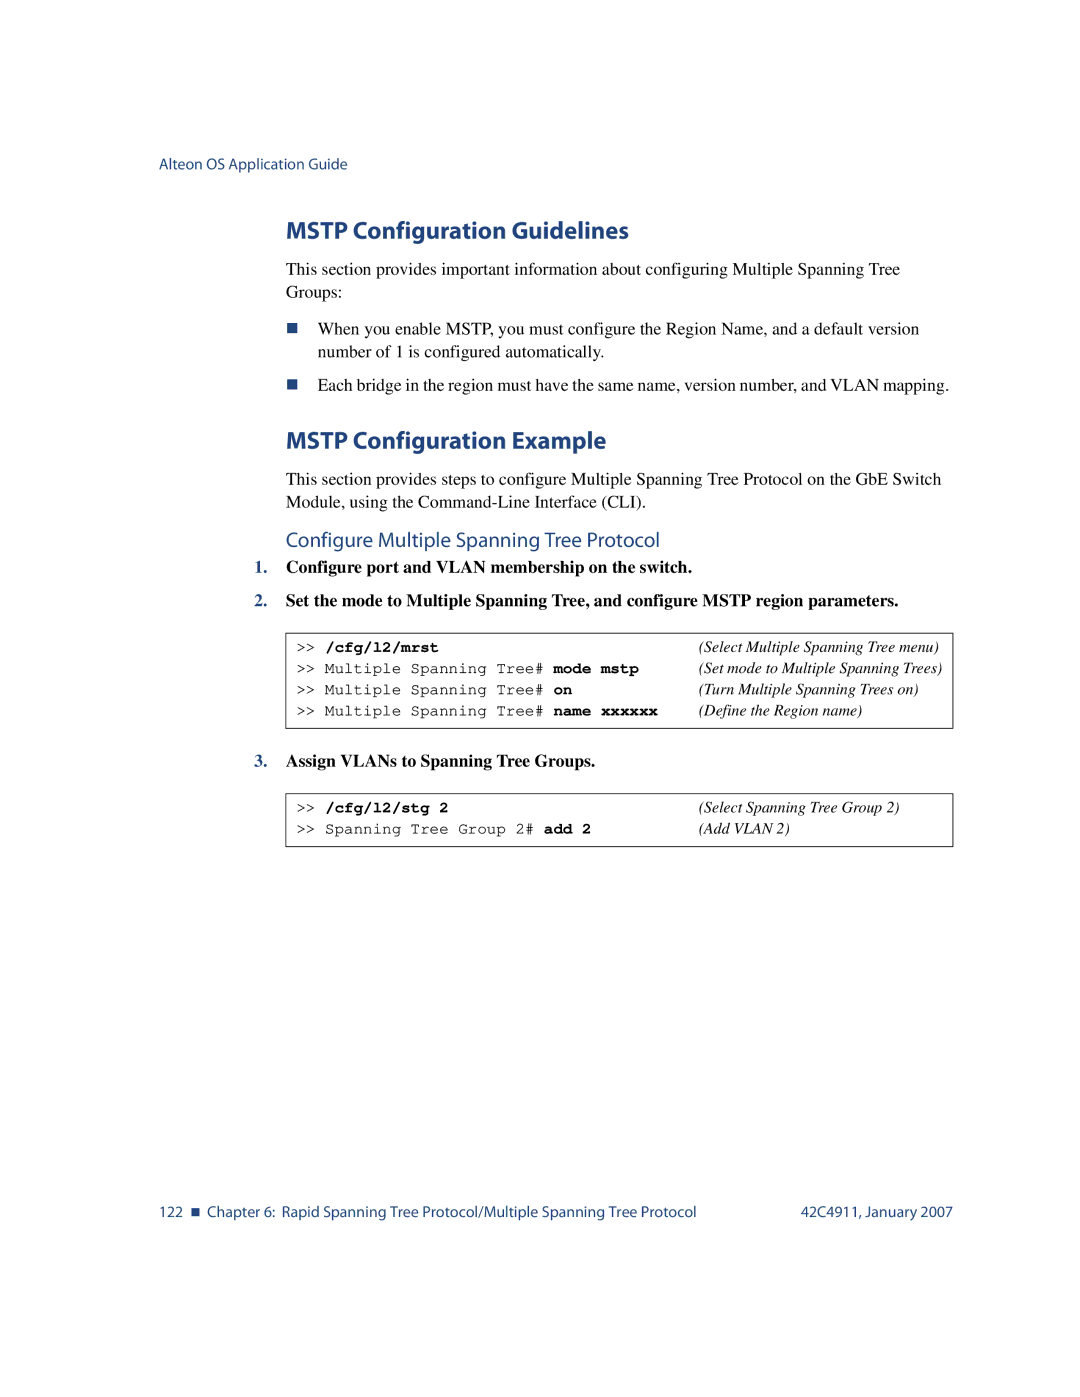 Nortel Networks 42C4911 Mstp Configuration Guidelines, Mstp Configuration Example, Assign VLANs to Spanning Tree Groups 